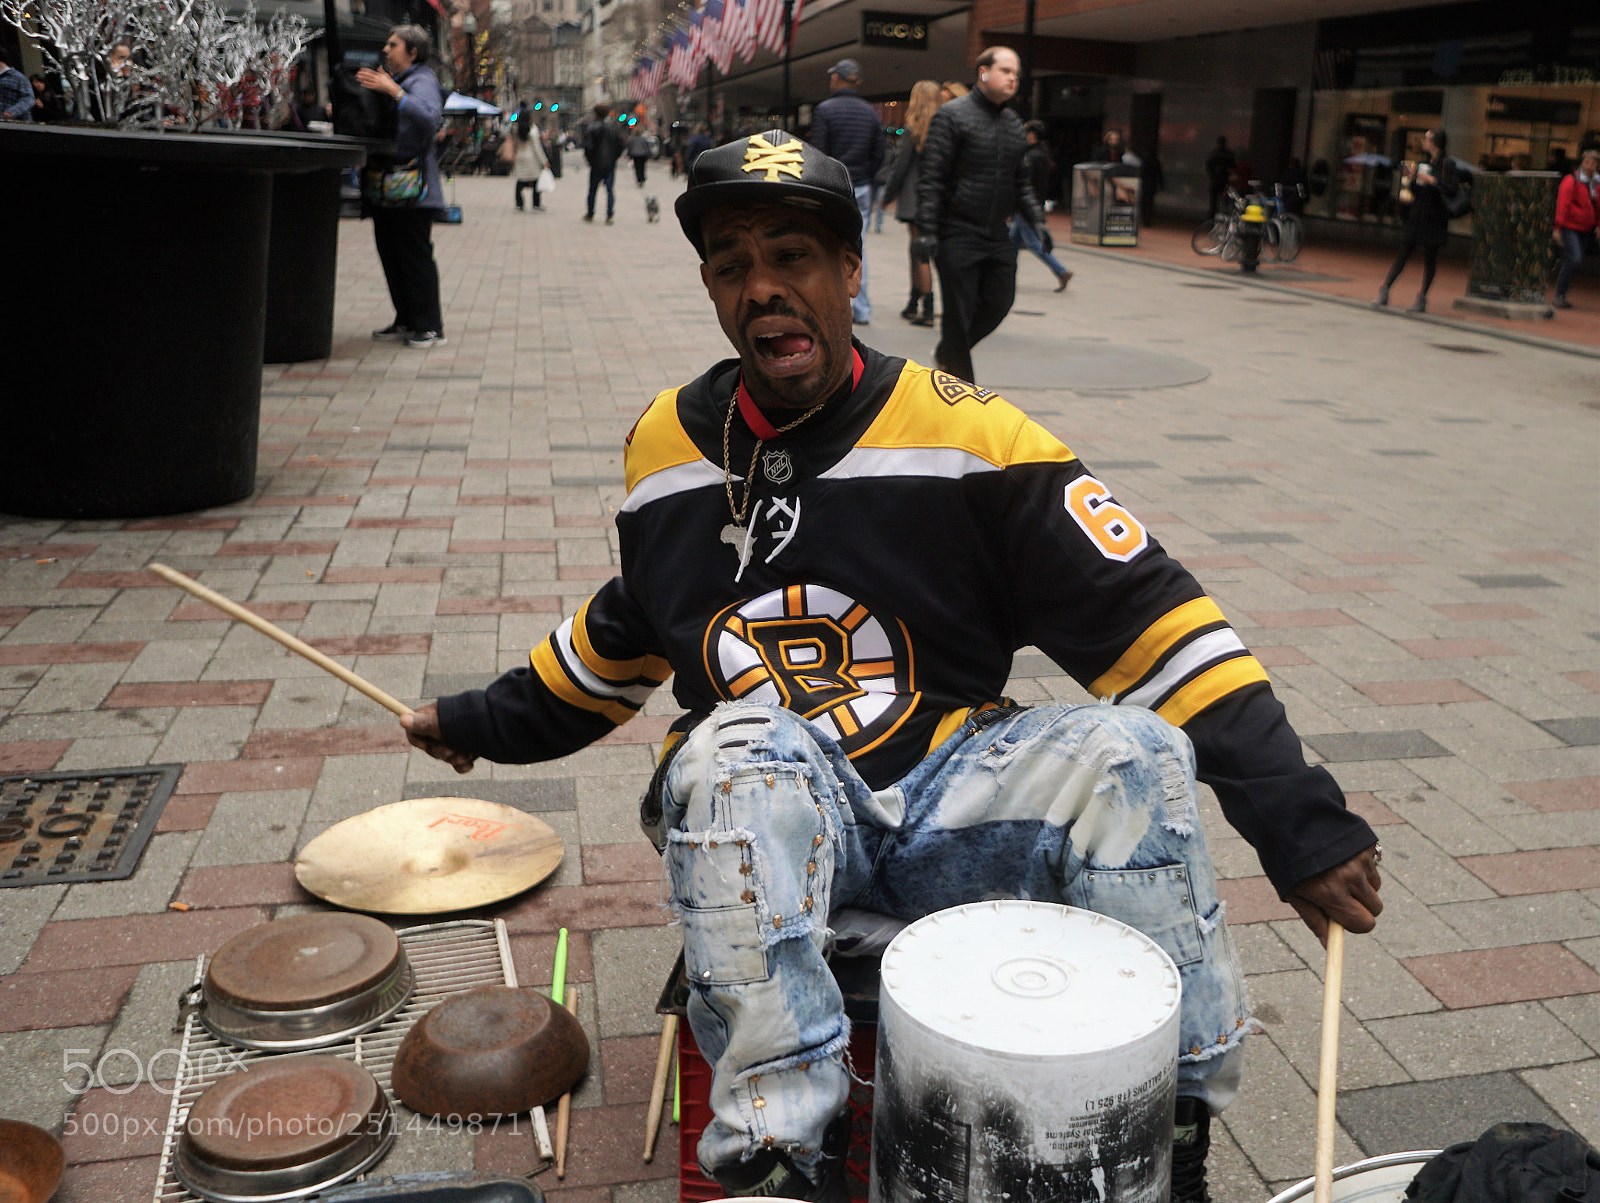 Sony a6500 sample photo. Street drummer photography